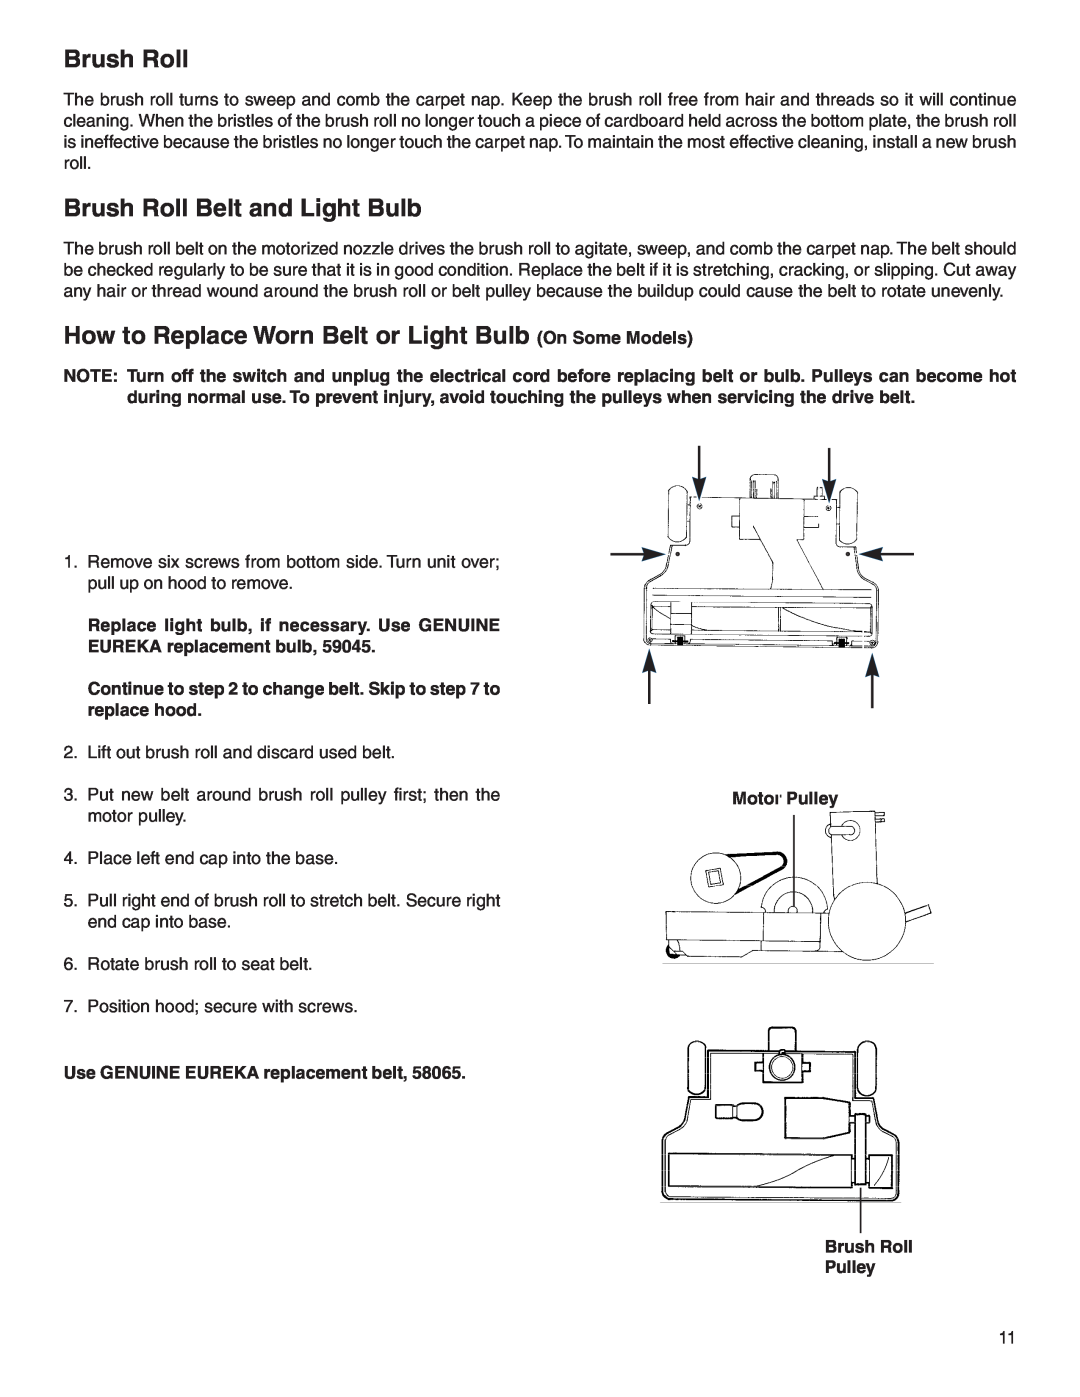 Eureka 6900 Series Brush Roll Belt and Light Bulb, How to Replace Worn Belt or Light Bulb On Some Models, replace hood 